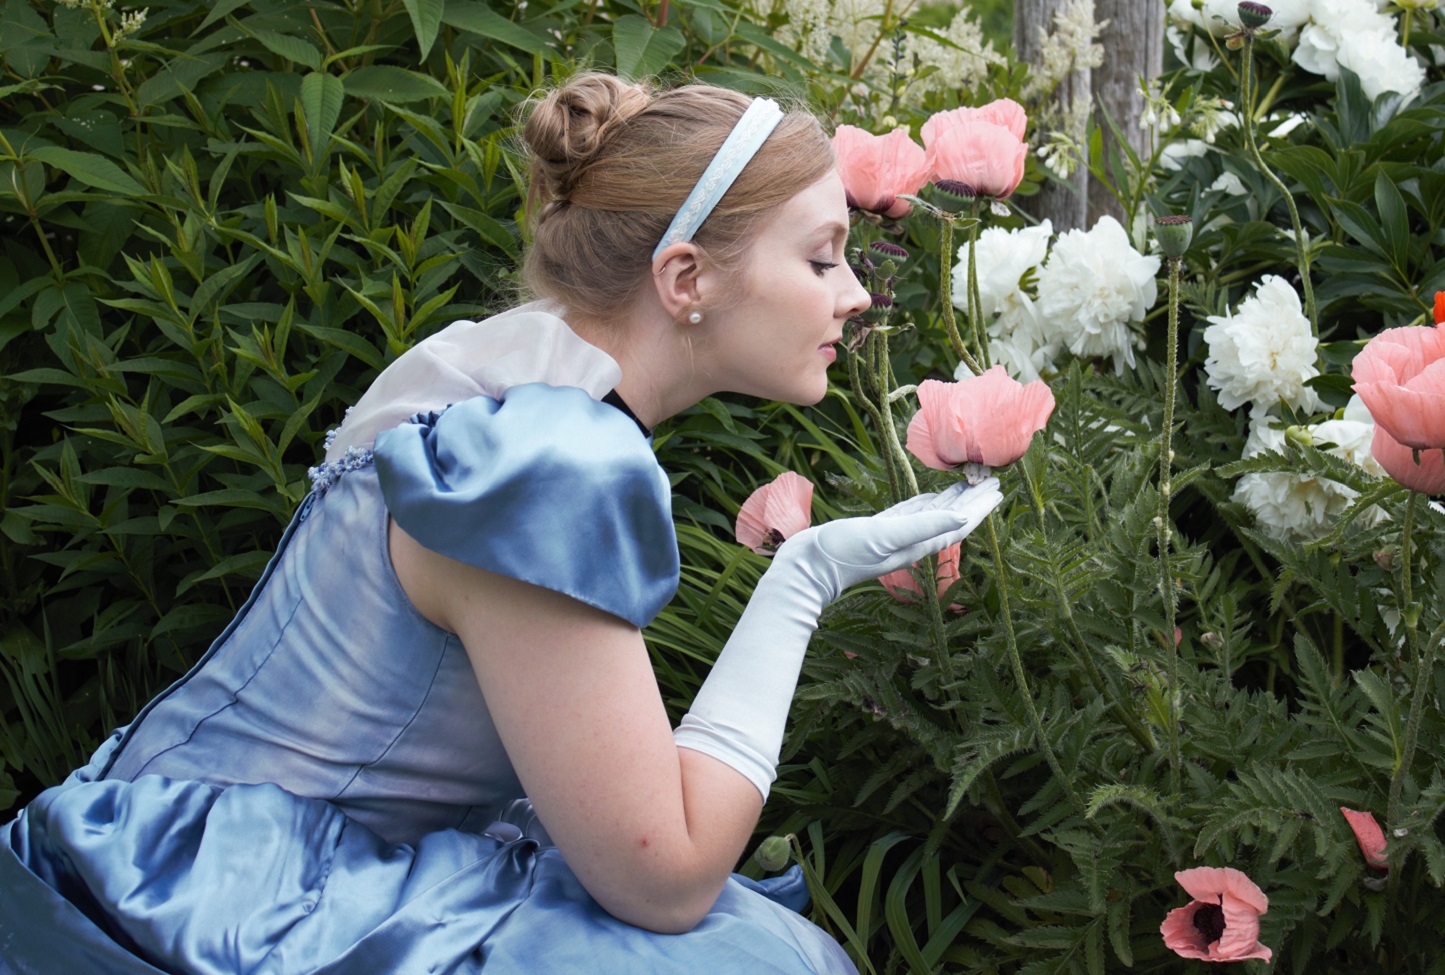 history actor dressed as Cinderella at Black Creek Pioneer Village Once Upon a Time event